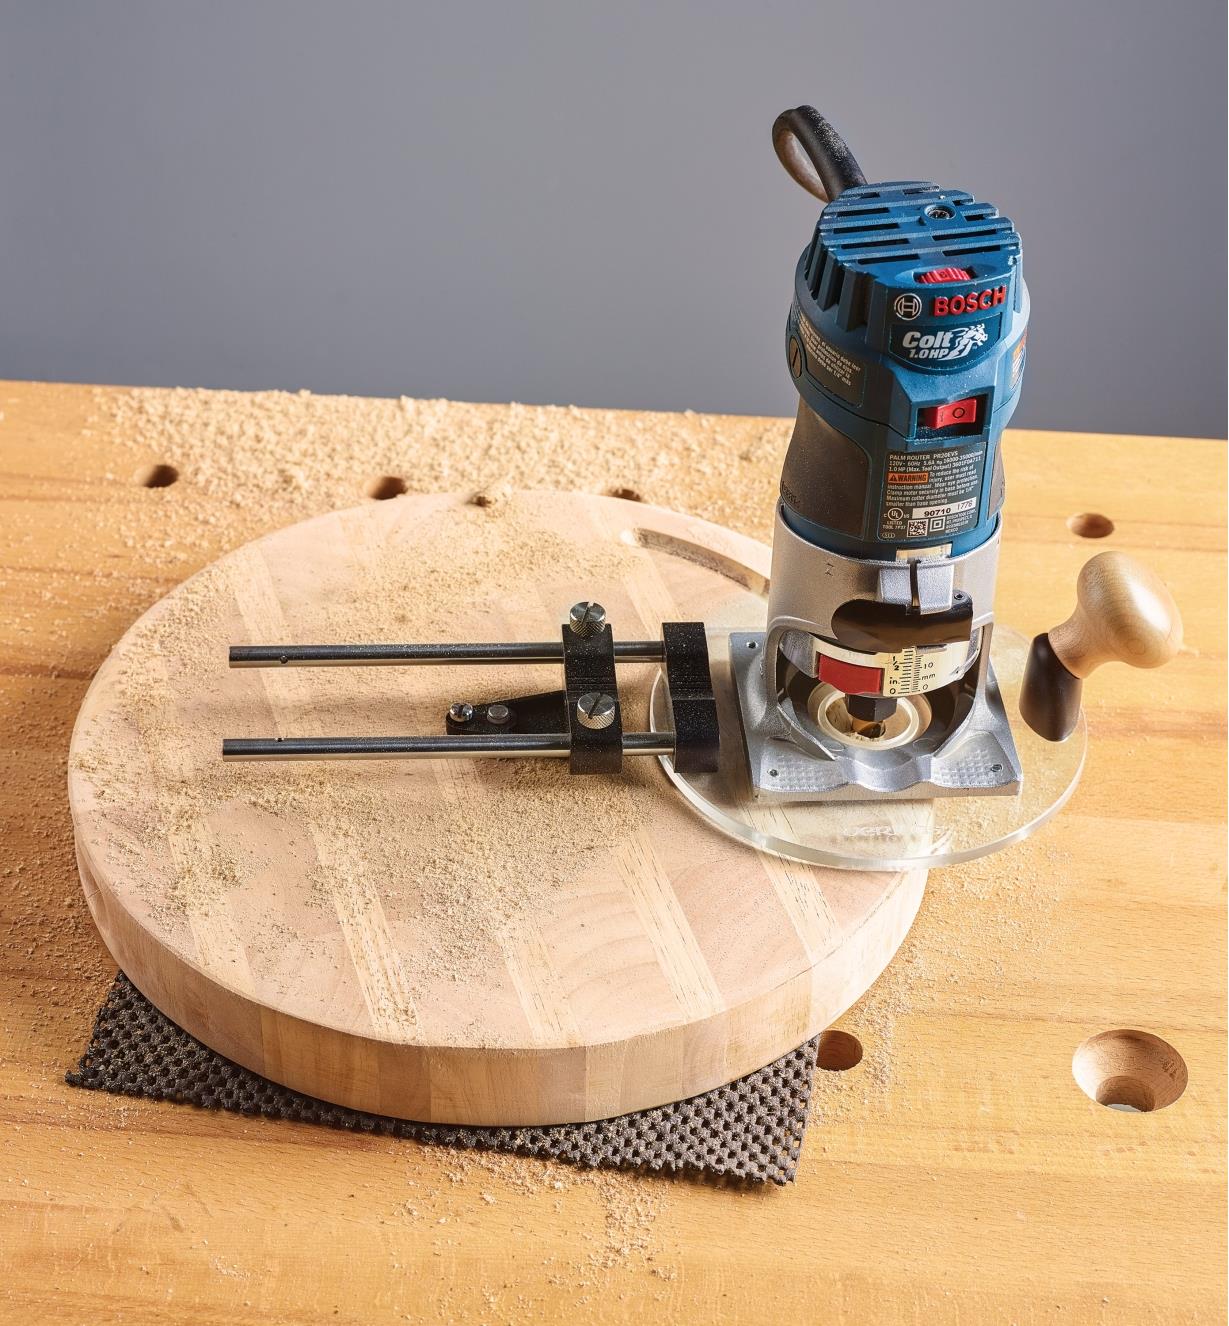 Center kit used with a compact router to rout a circle in a piece of wood